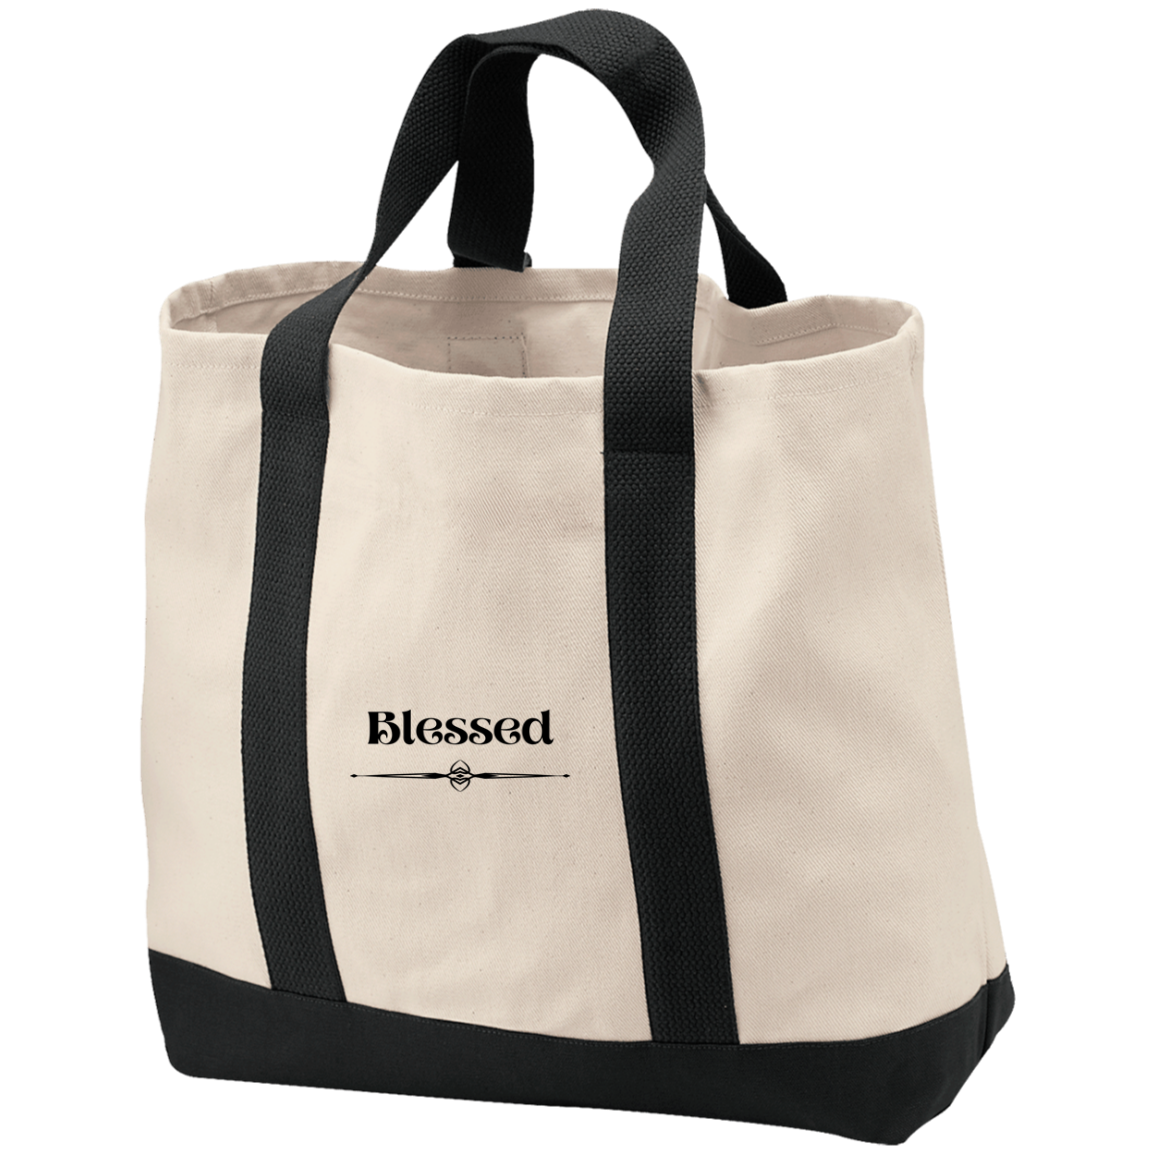 Blessed - 2-Tone Shopping Tote